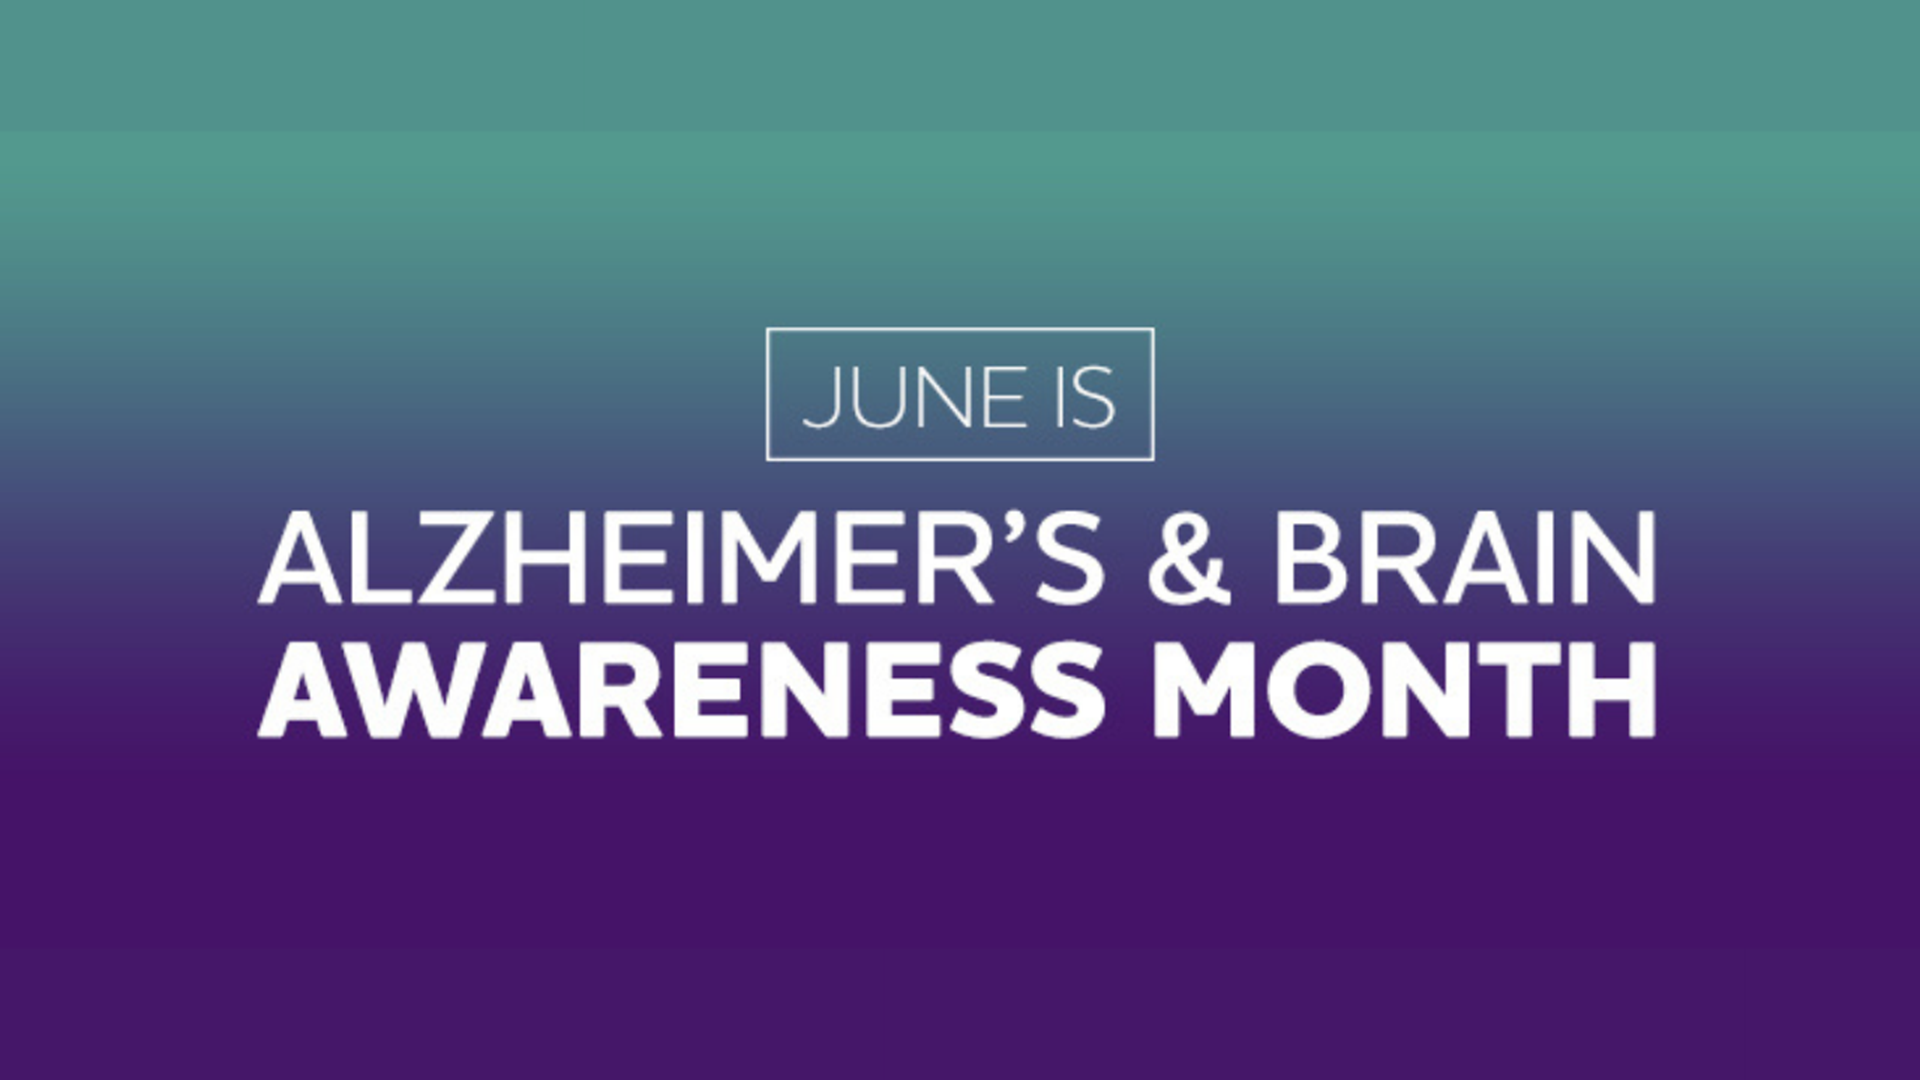 Executive Director of Alzheimer's Association Arkansas Chapter Kirsten Dickins shares tips to help make brain health an important part of people’s return to normal.